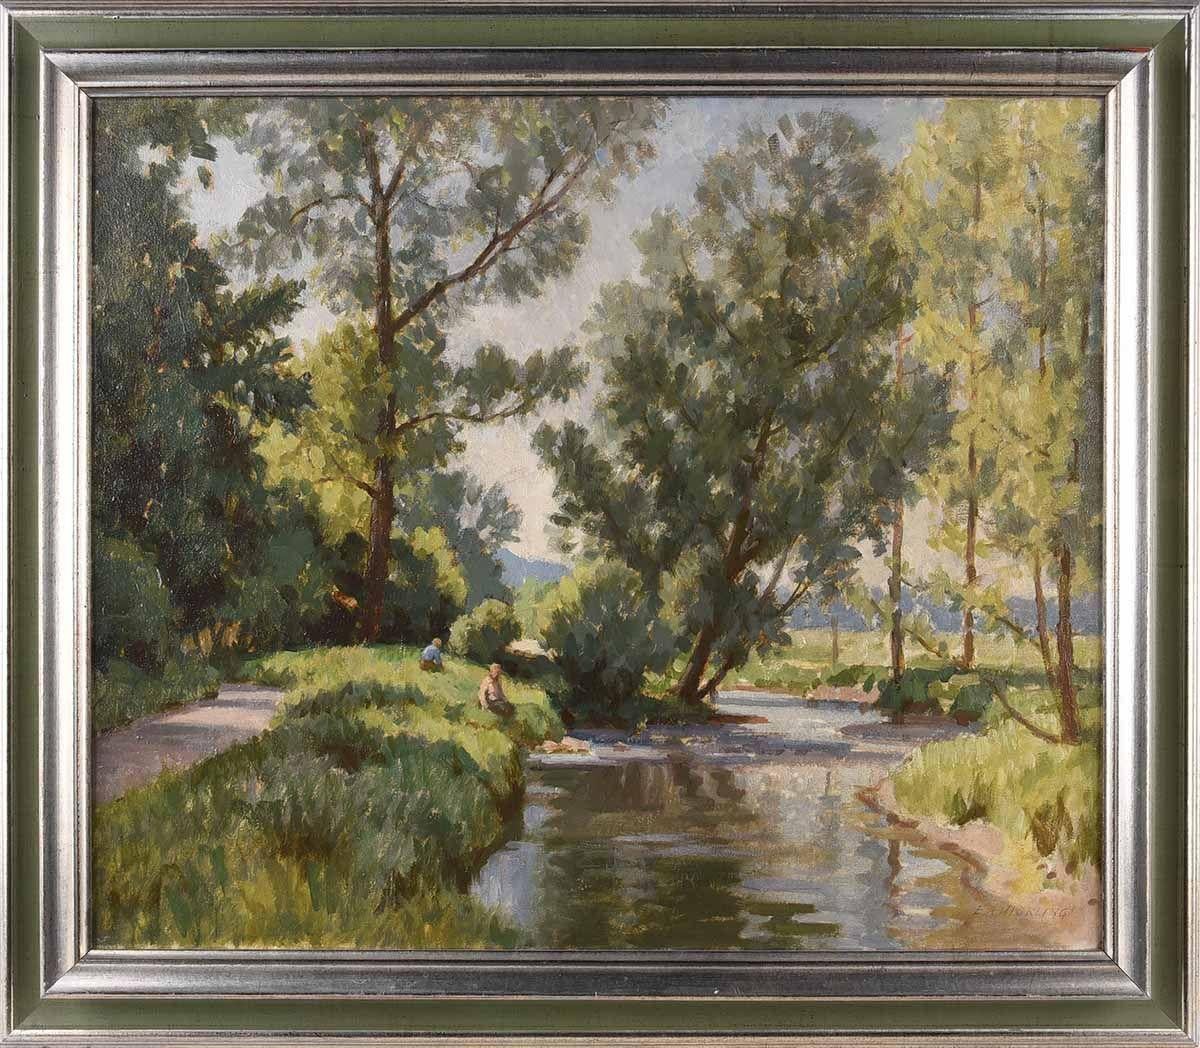 Oil Painting of Figures by a Tree Lined River in Irish Summer by 20th Century British Artist, Edward Albert Hickling (1913-1998). 

Edward Albert Hickling was a British painter who was born in Nottingham, England in 1913. Both a painter and